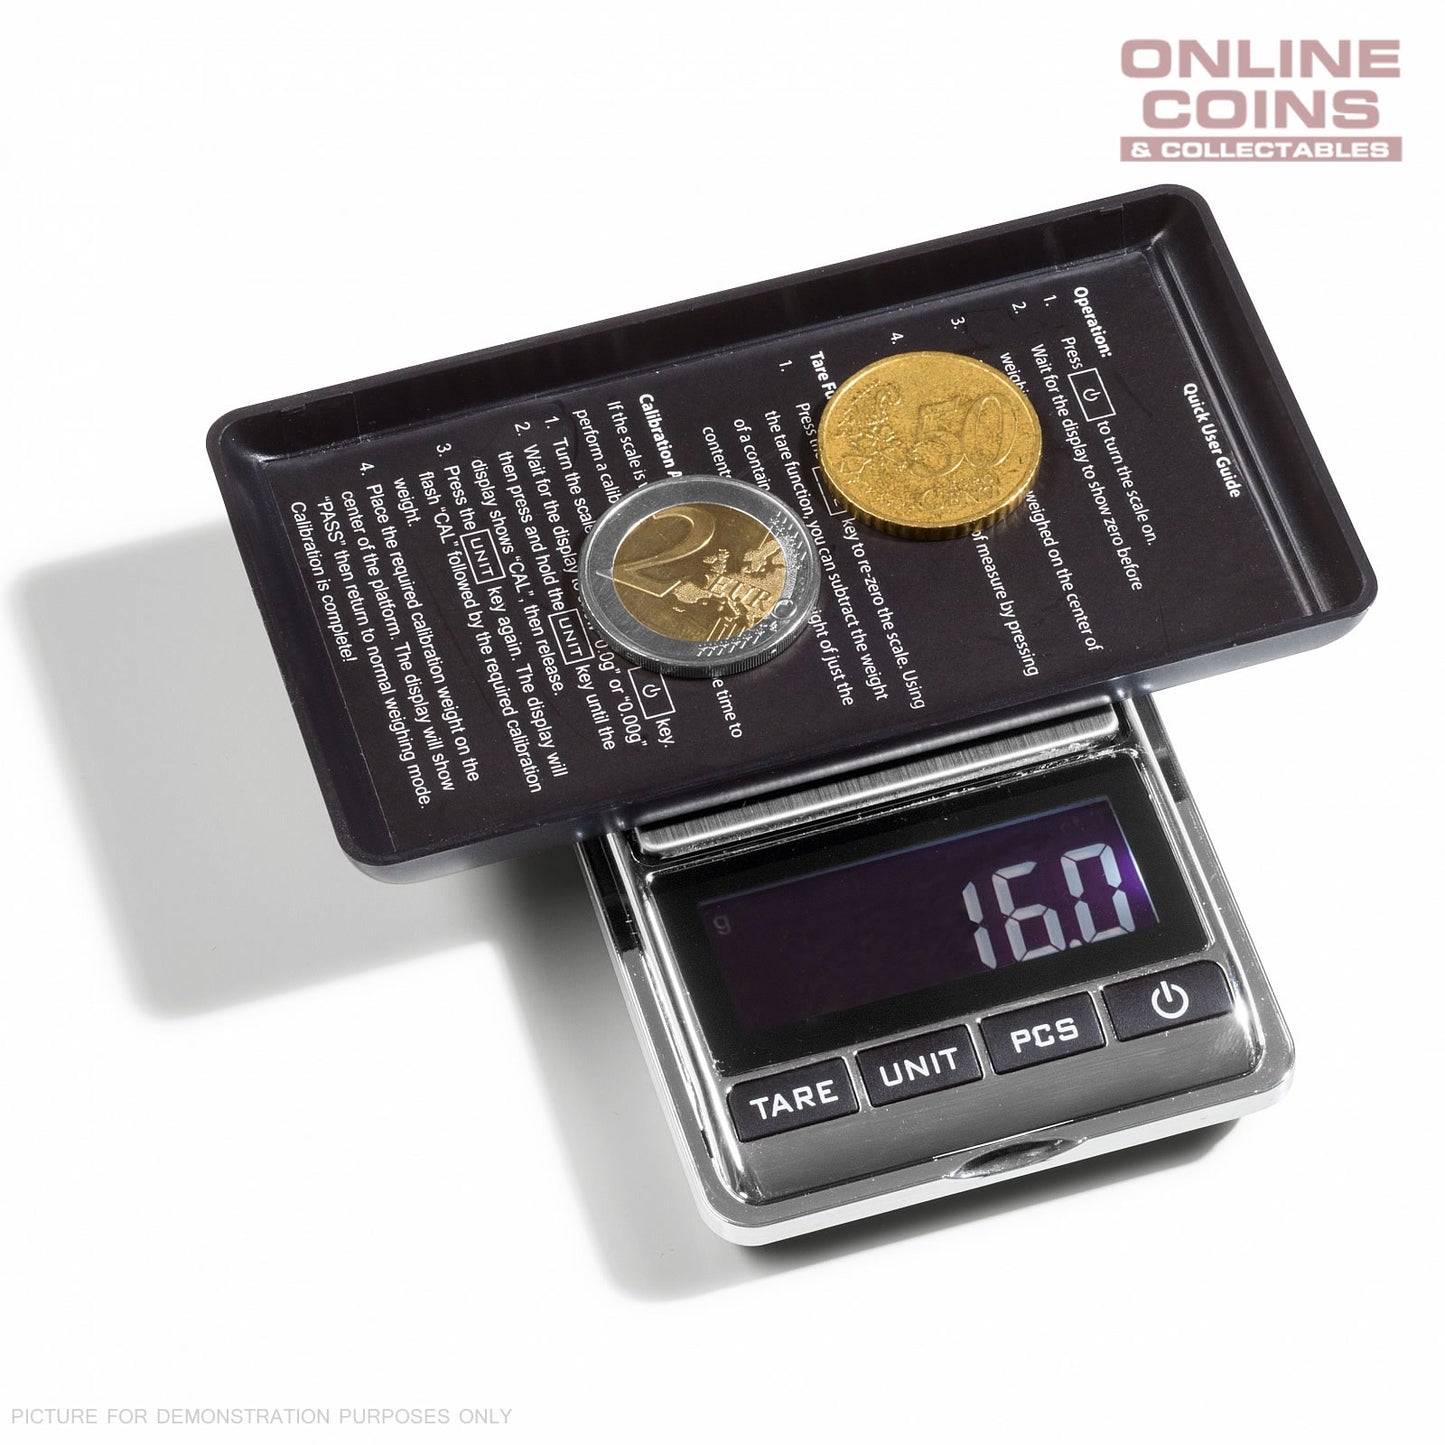 LIGHTHOUSE LIBRA 100 DIGITAL COIN SCALE Range 0.01 - 100 G LCD Display